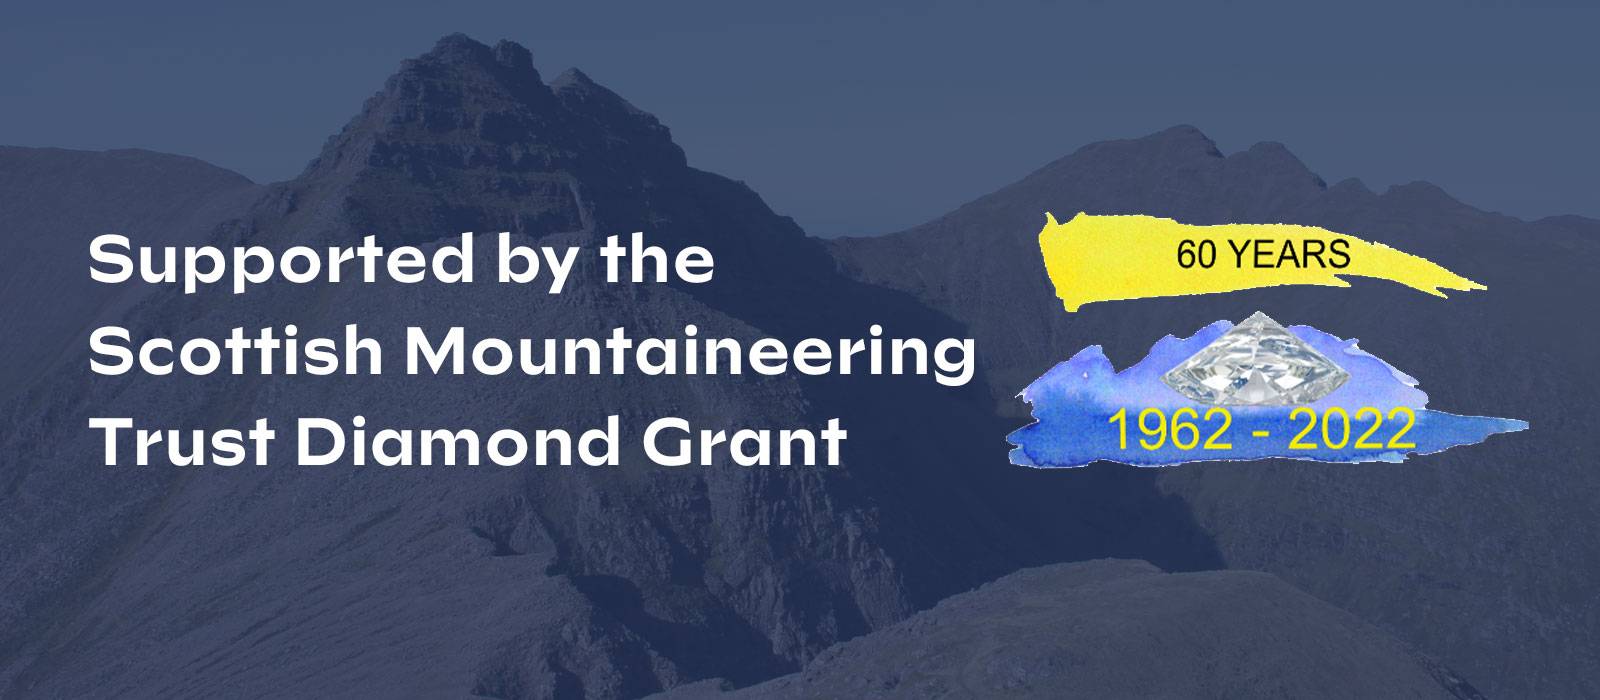 Supported by the Scottish Mountaineering Trust Diamond Grant